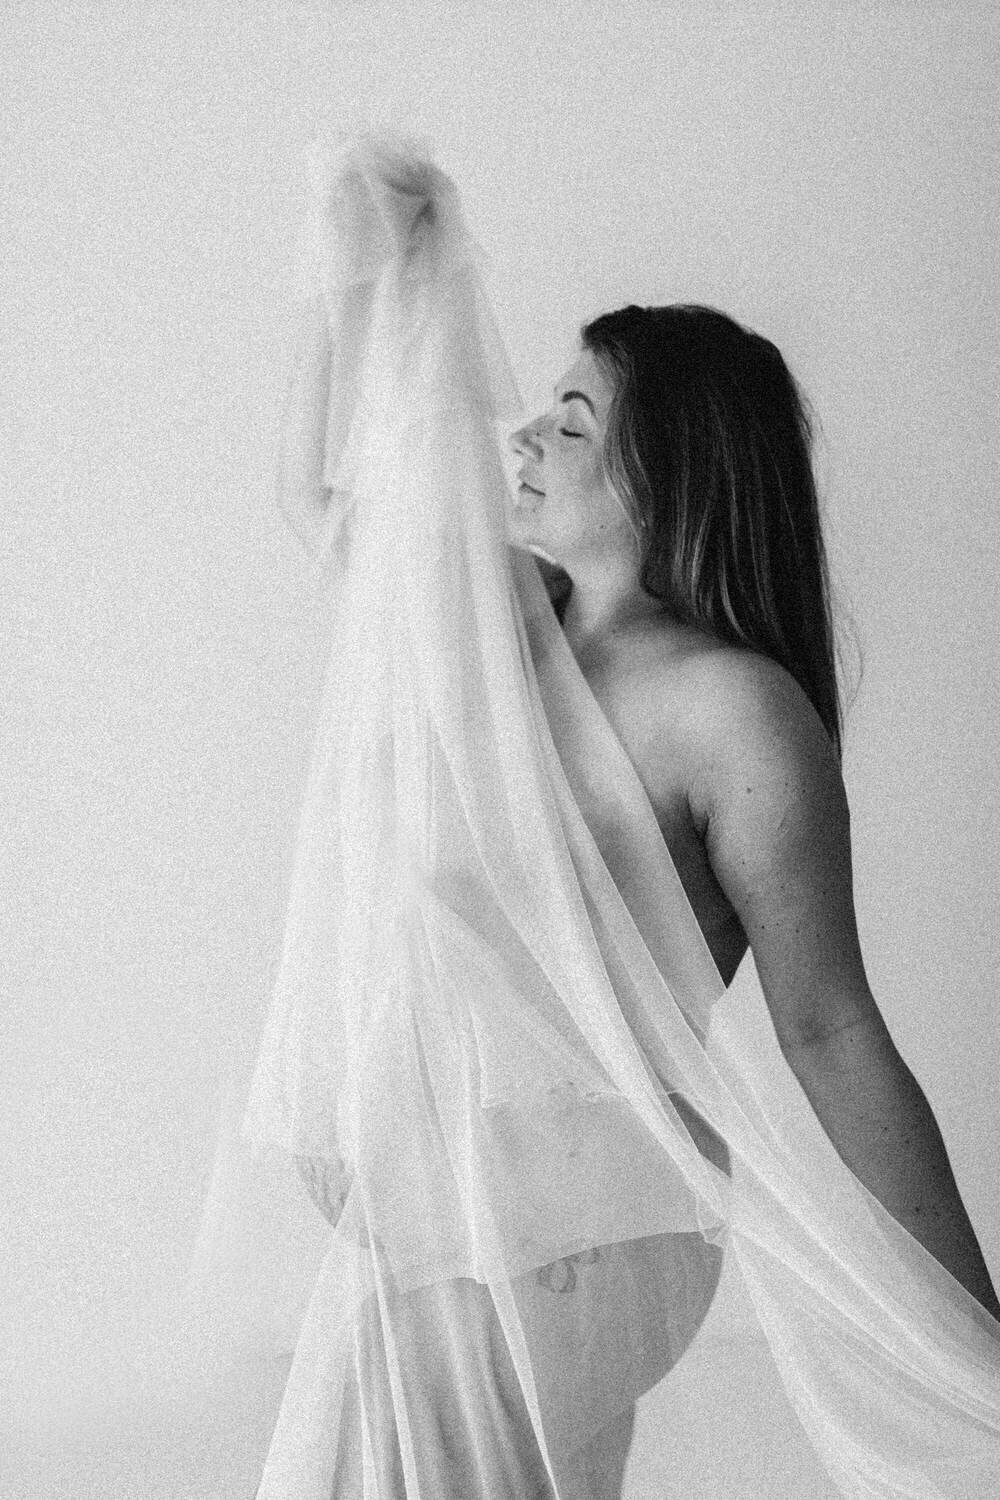 Woman holds fabric across her naked body and dances